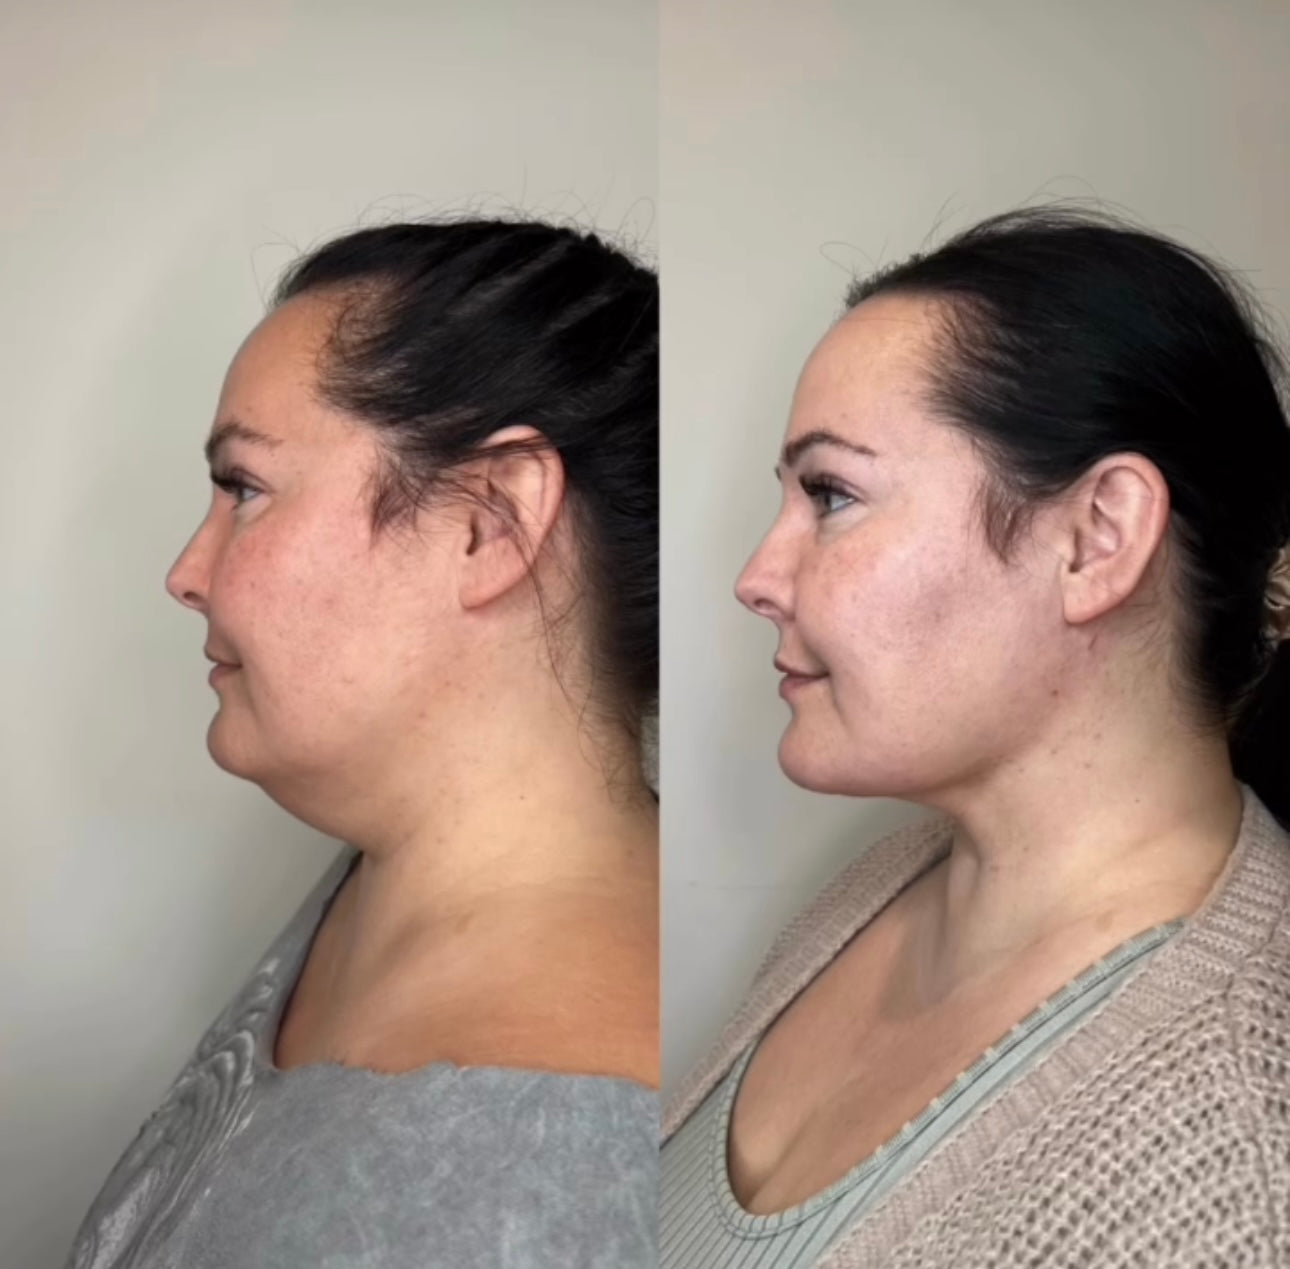 Kybella injections